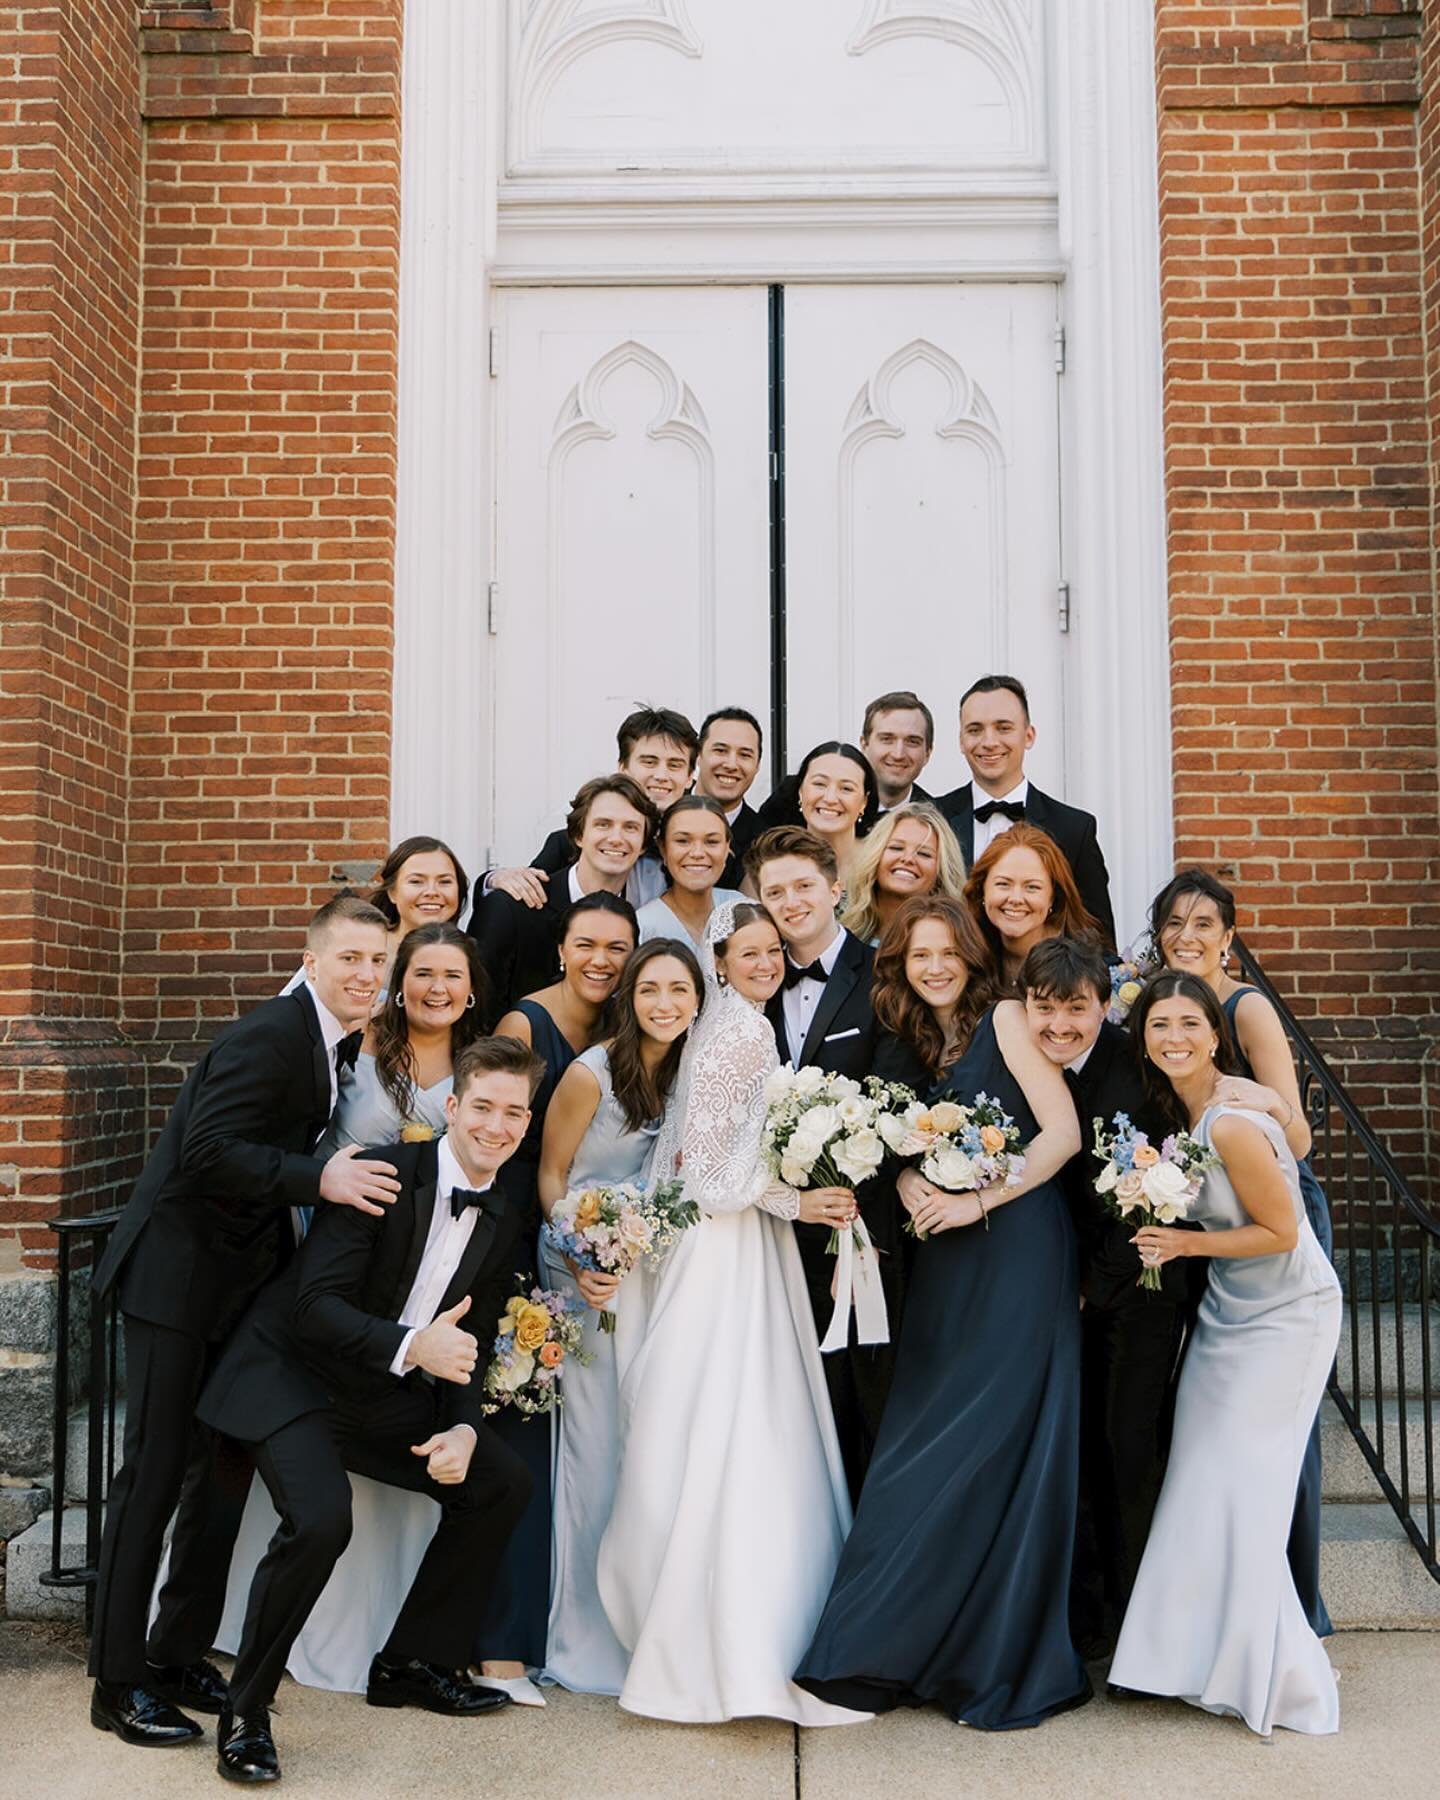 From teary eyes in the church pews, to beaming smiles during photos, and belly laughs during toasts. One of the biggest highlights of every wedding day is getting to know your amazing best friends! Seeing how much they love you, and how they&rsquo;ve